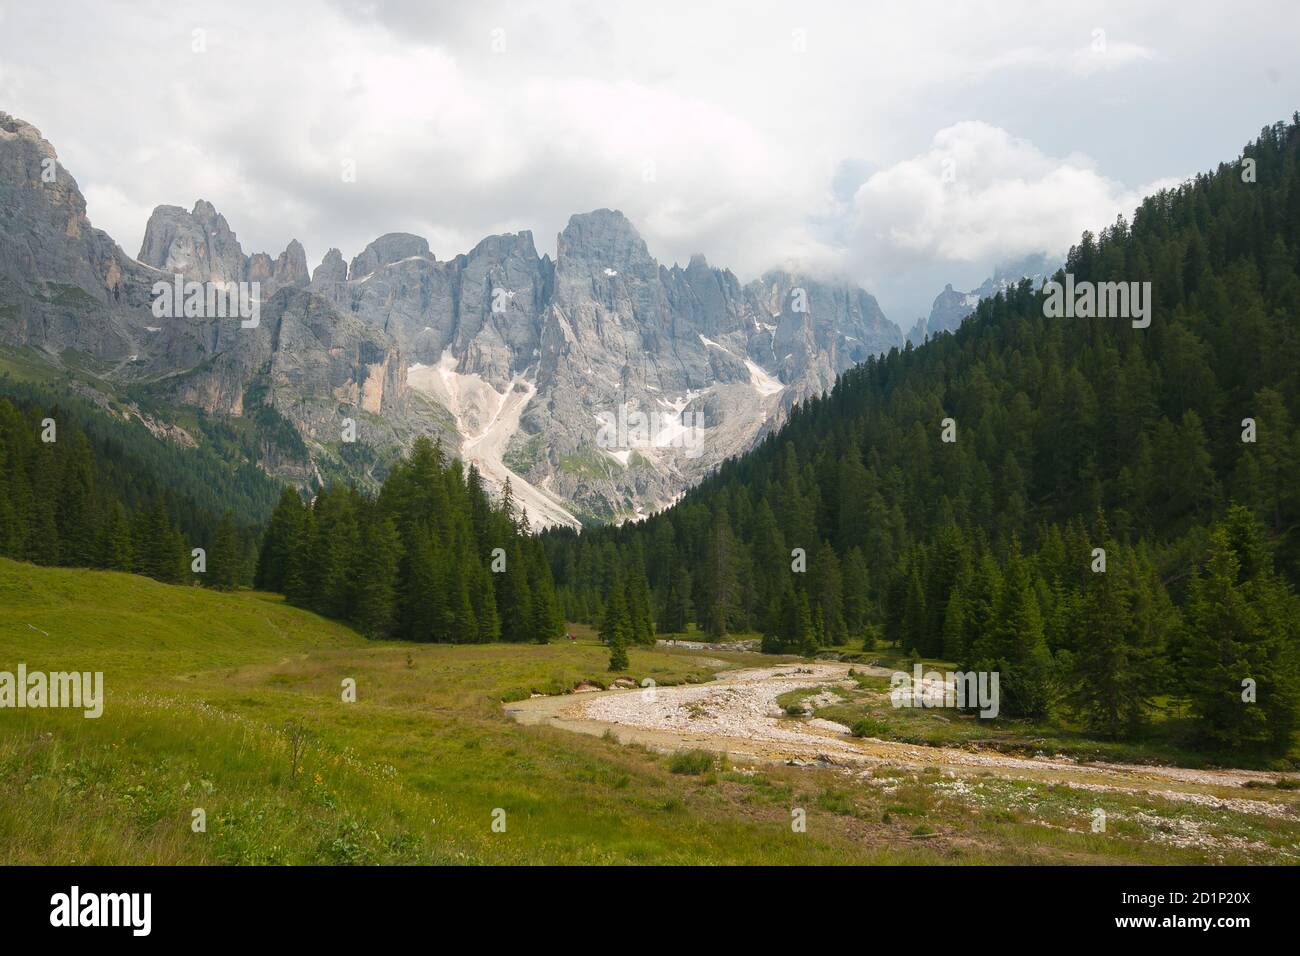 The Pale of San Martino group view from Malga Venegia in the Dolomites Stock Photo